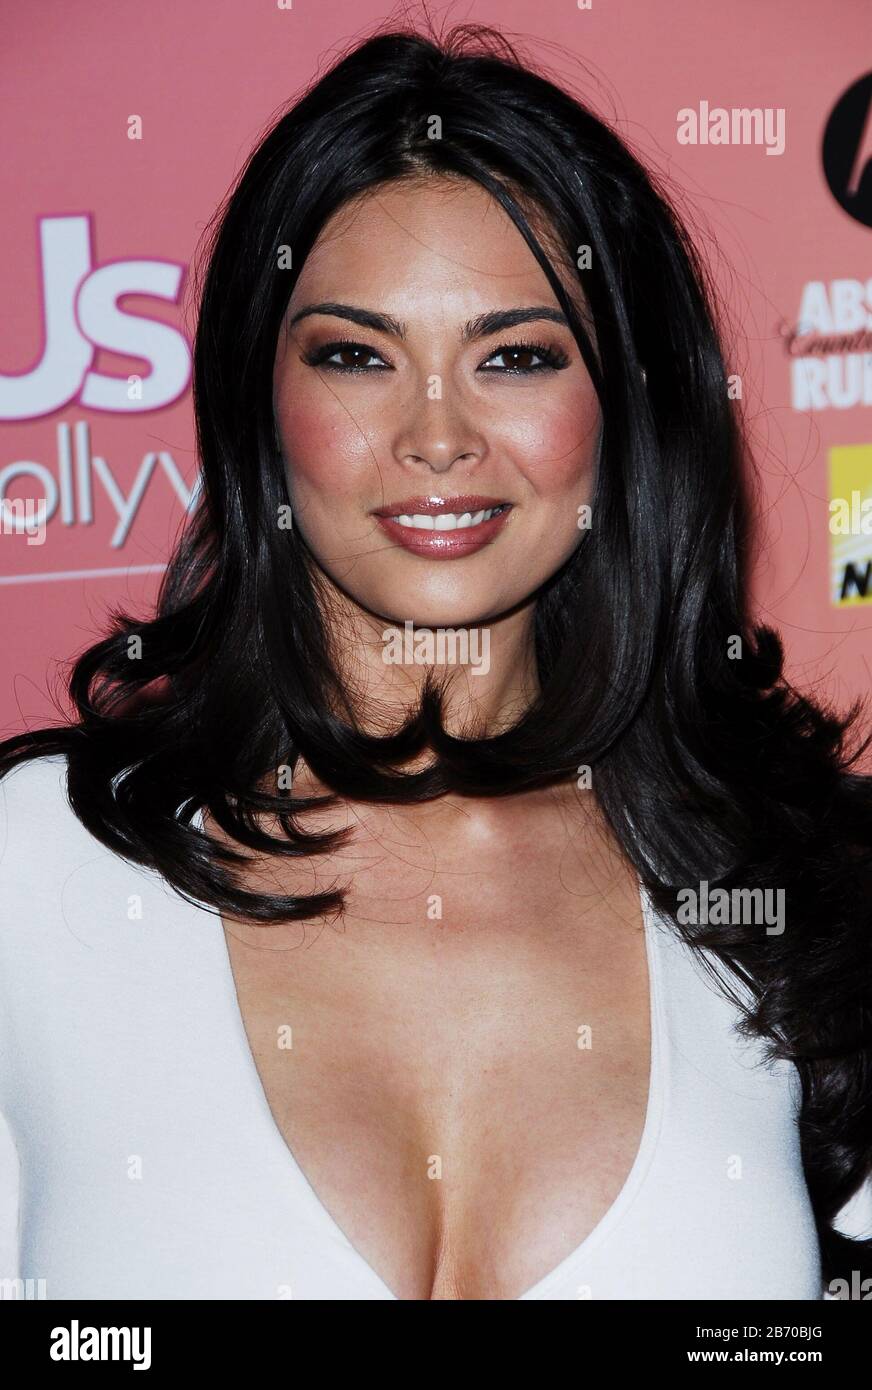 Terra Patrick at the US Weekly Hot Hollywood Awards held at Republic  Restaurant & Lounge in West Hollywood, CA. The event took place on  Wednesday, April 26, 2006. Photo by: SBM 